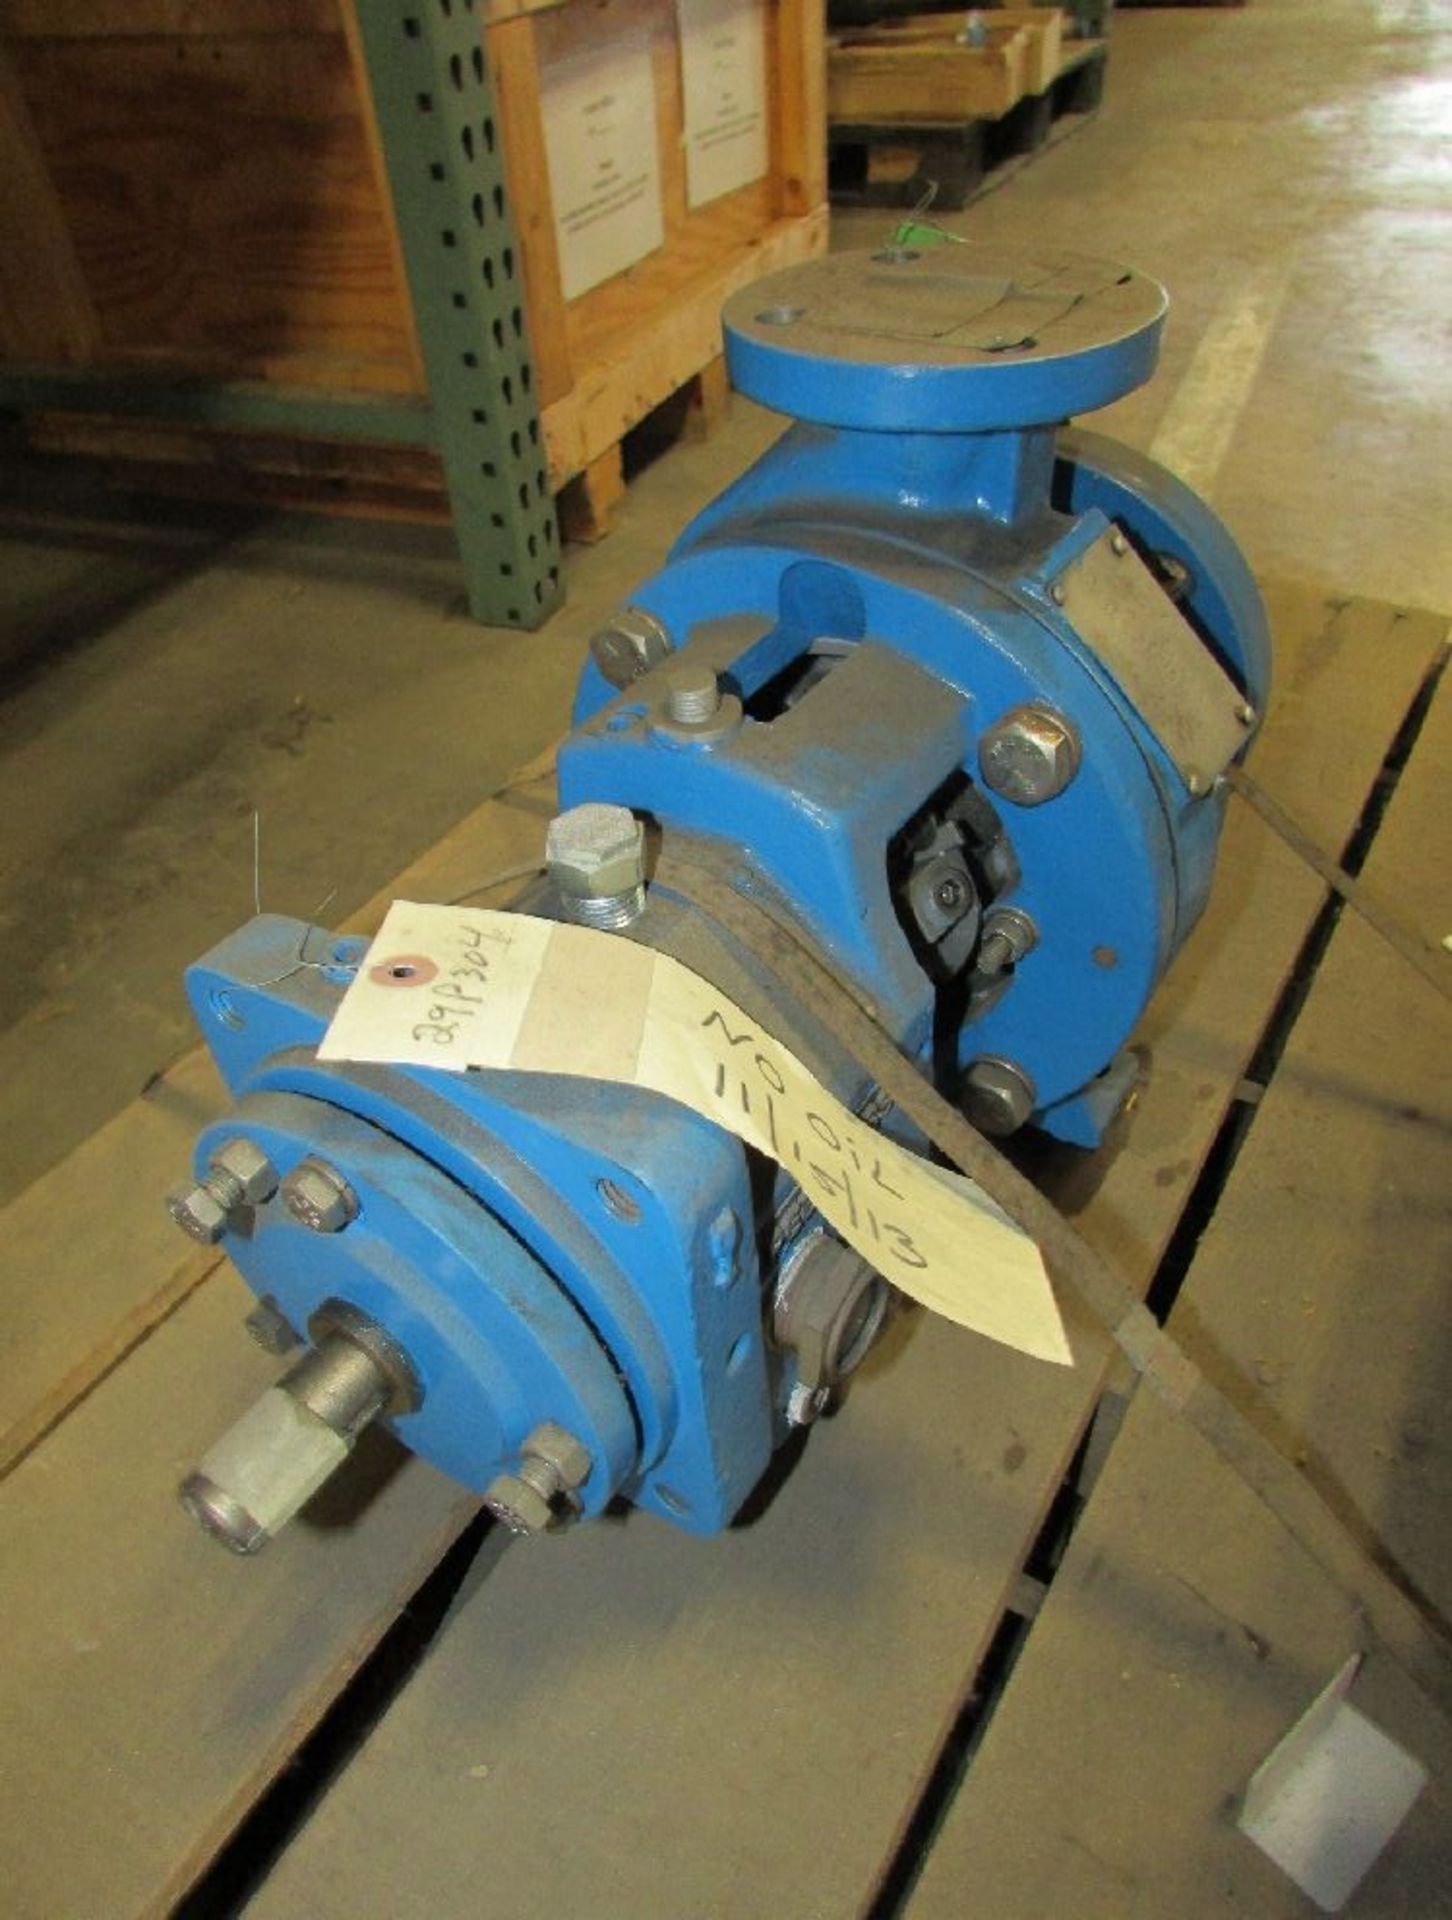 Peerless Pump Co Centrifugal Pumps - Image 7 of 8